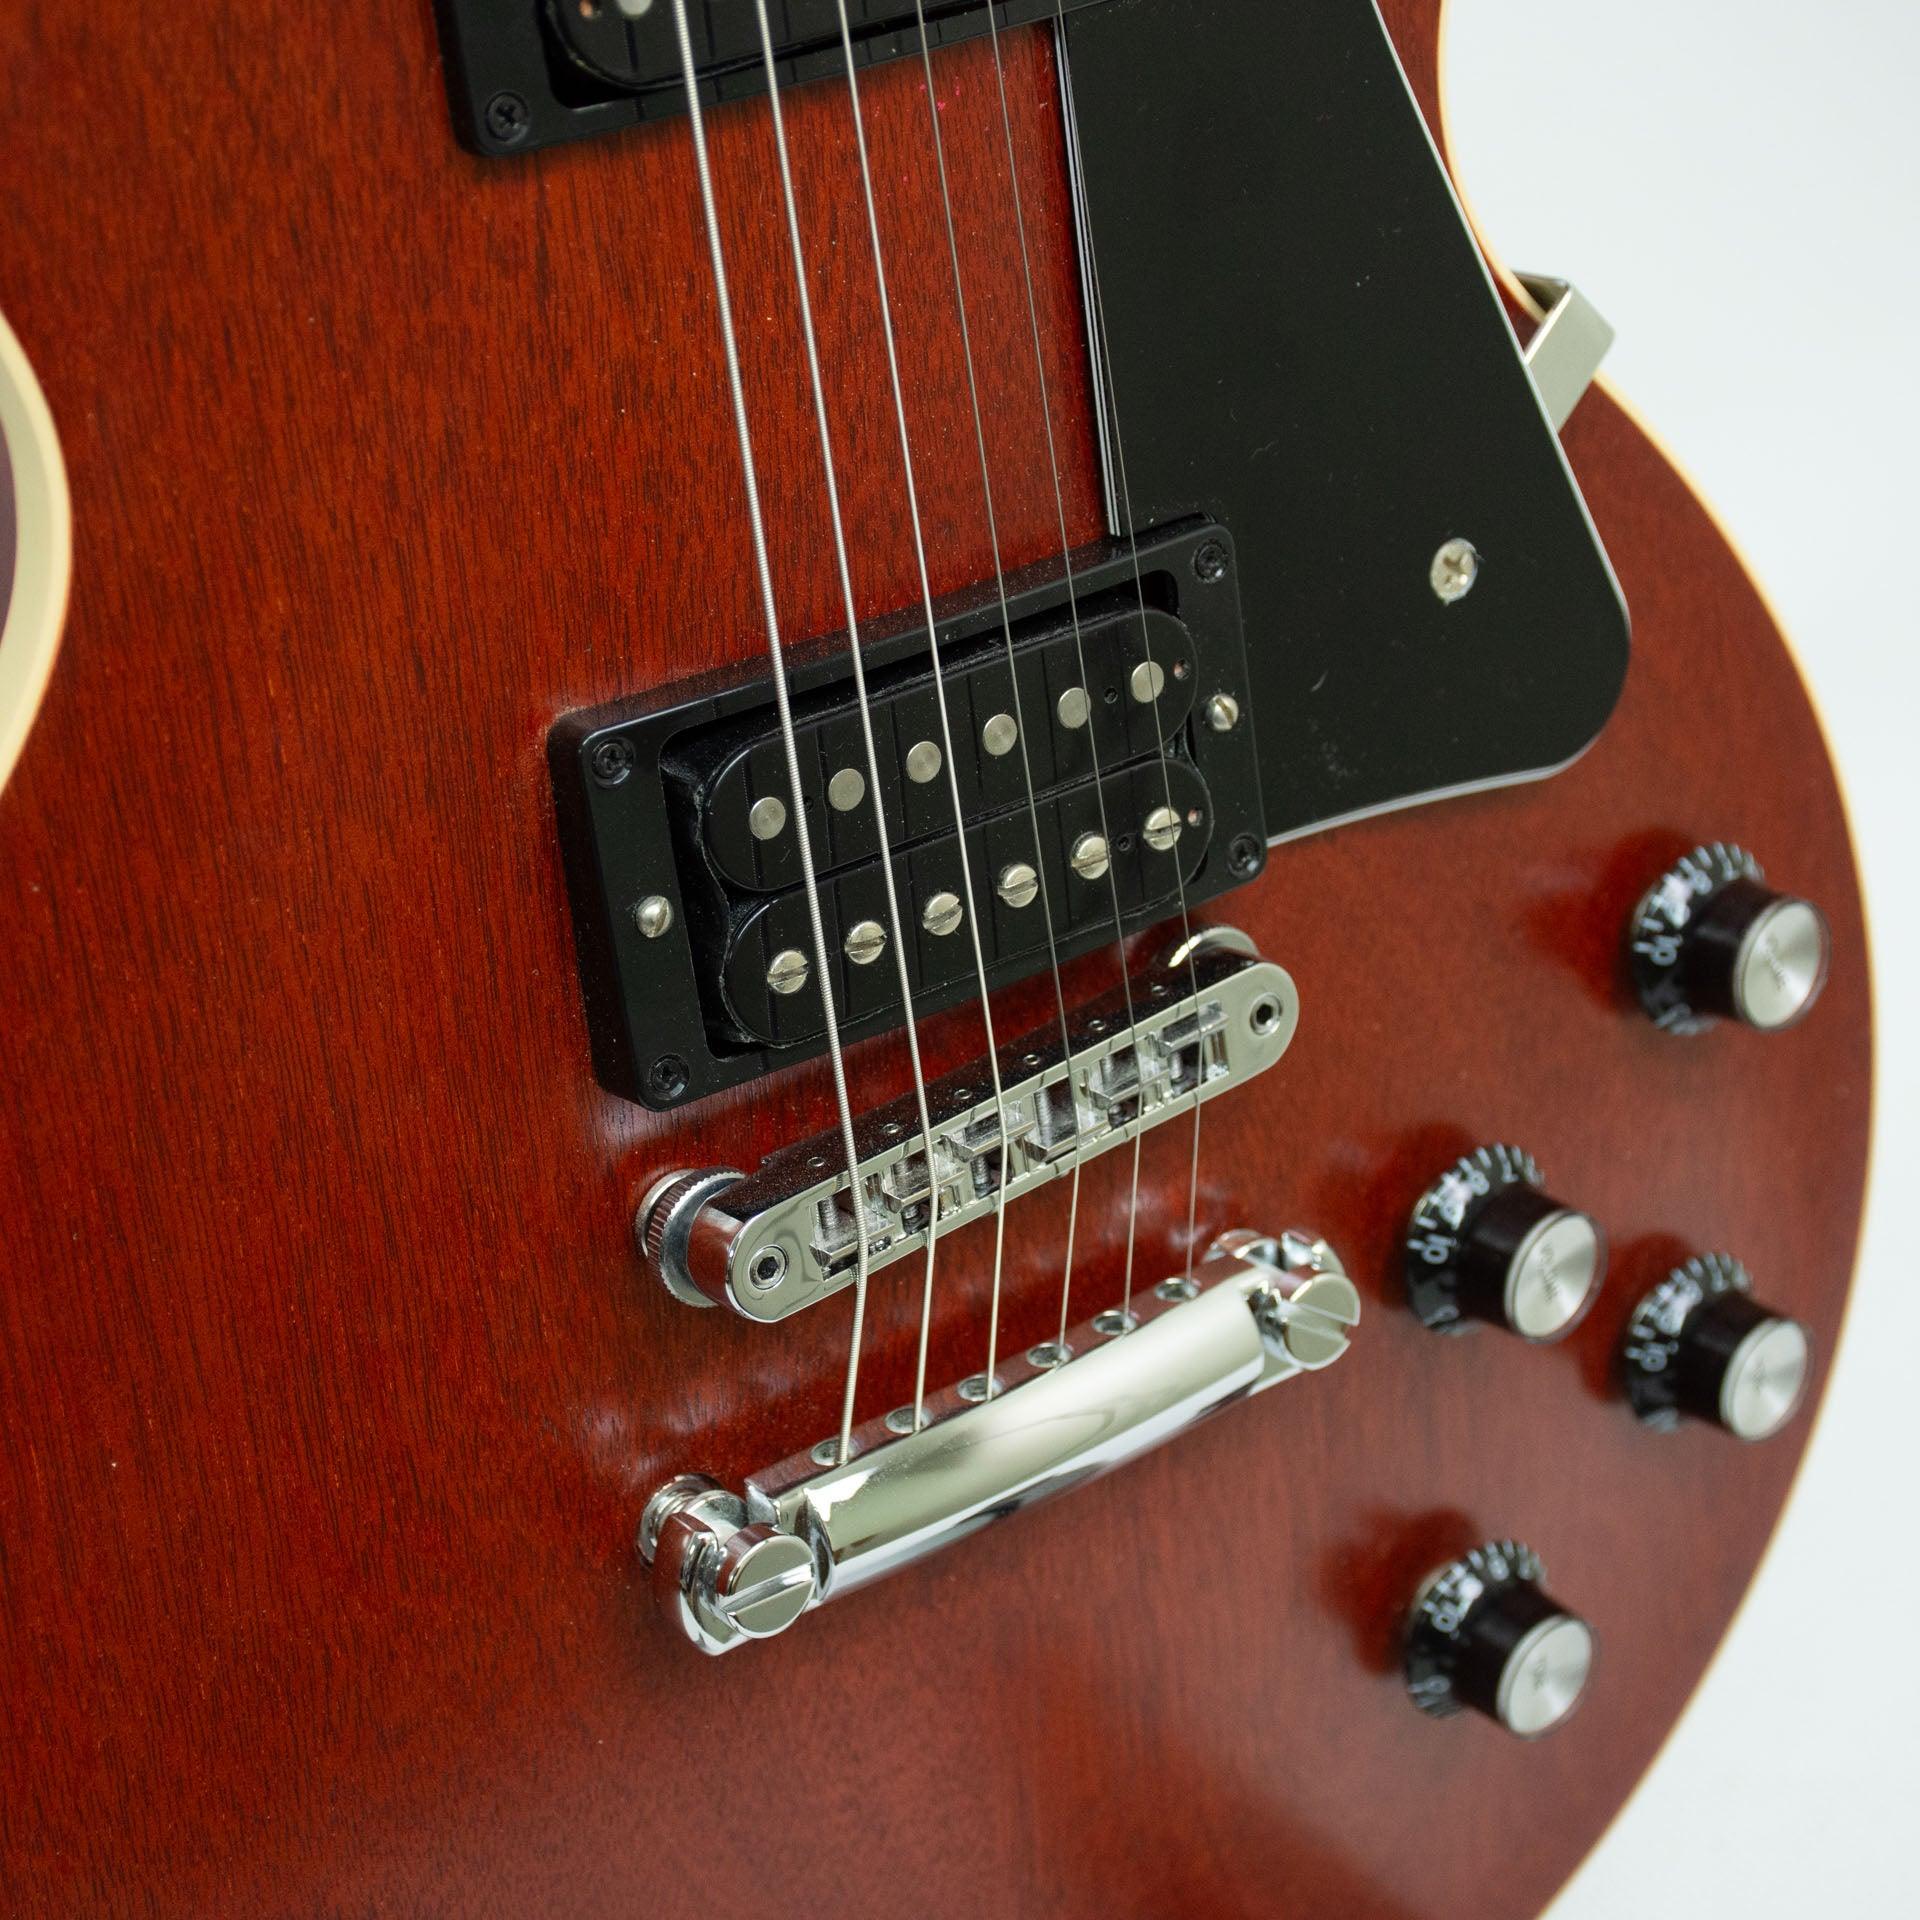 Gibson Les Paul Traditional Pro V - Satin Brown - ipawnishop.com